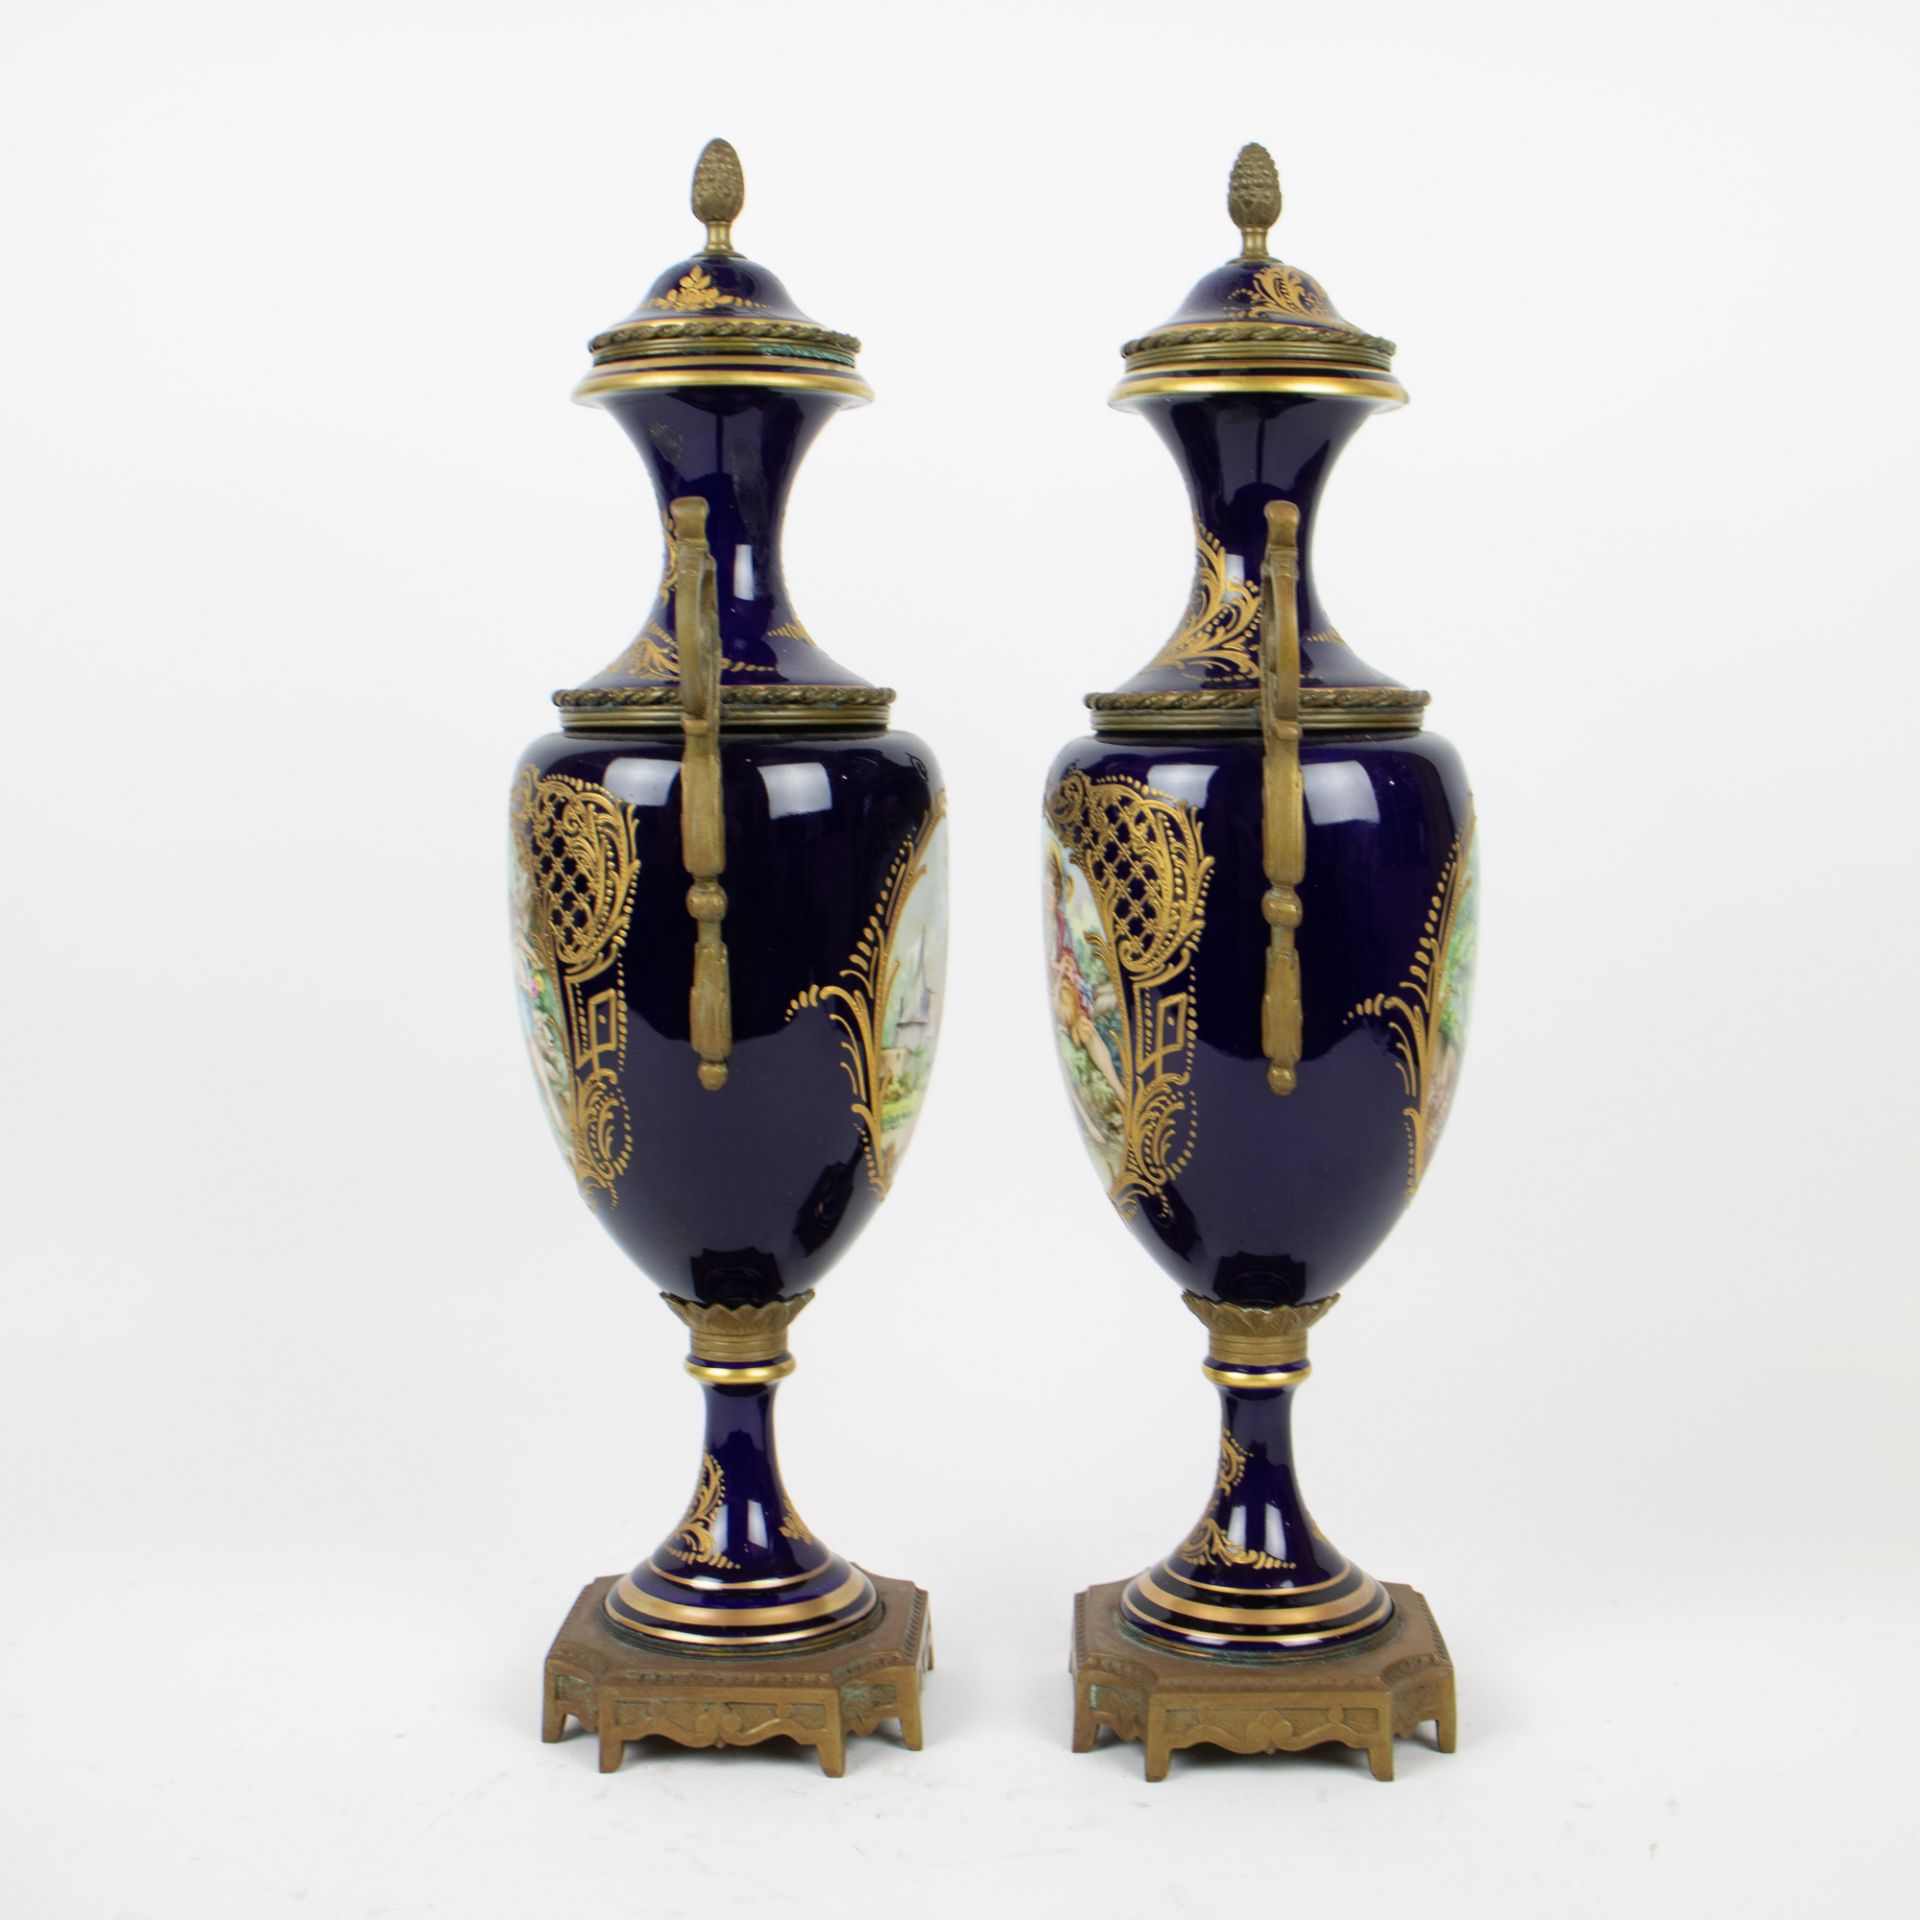 Sèvres handpainted garniture centre piece and a pair of covered vases - Image 8 of 16